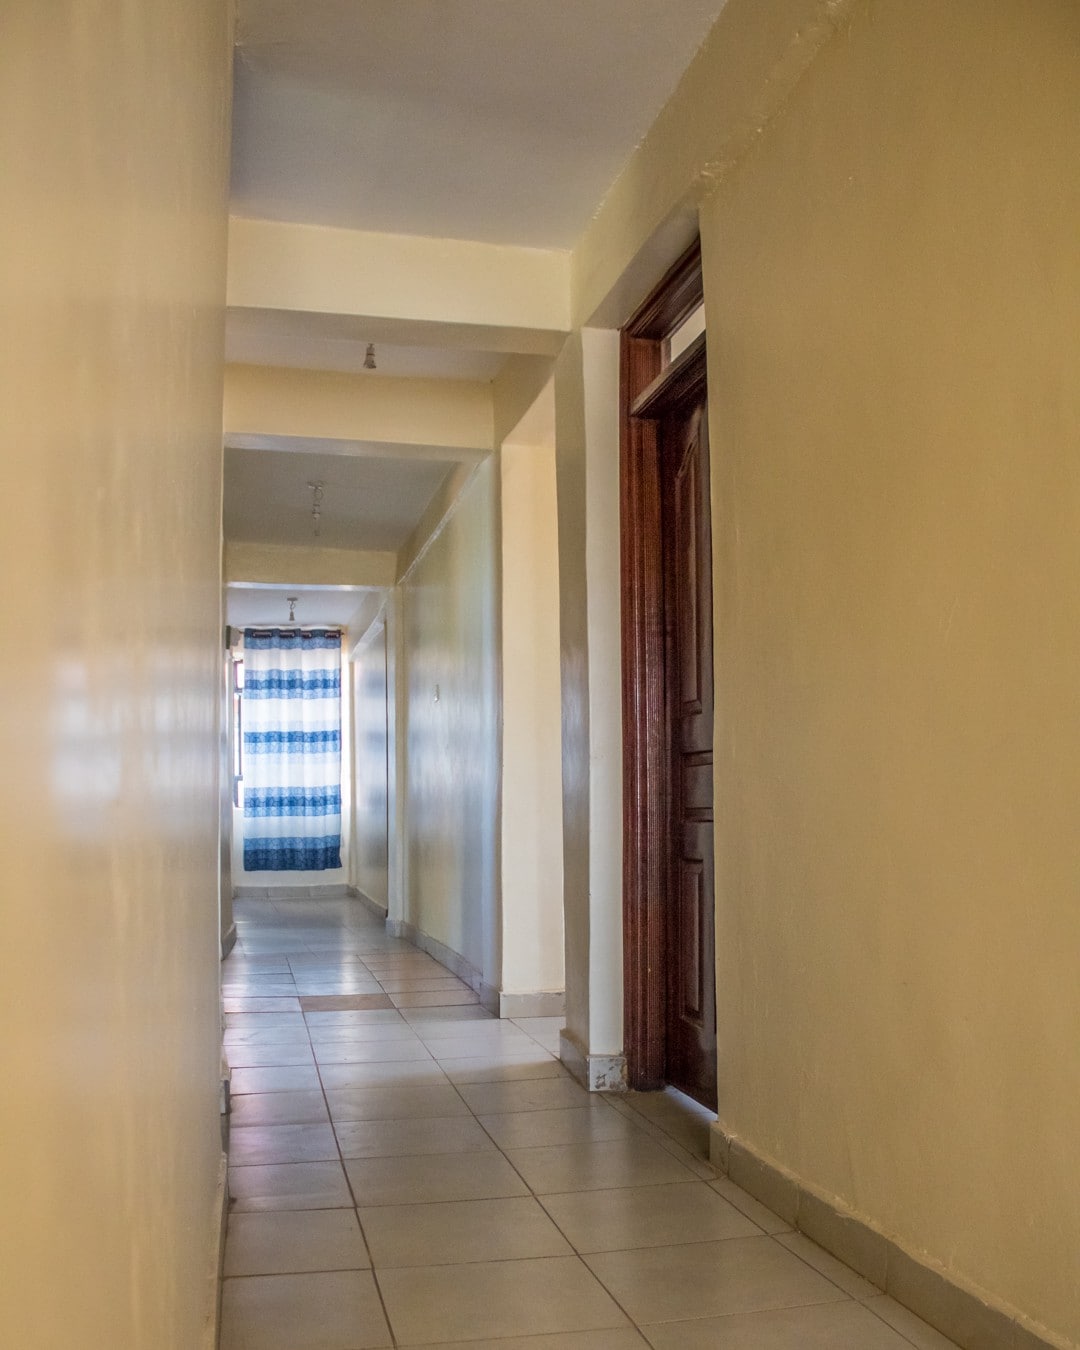 Affordable rooms to spend the night in Kisumu CIty